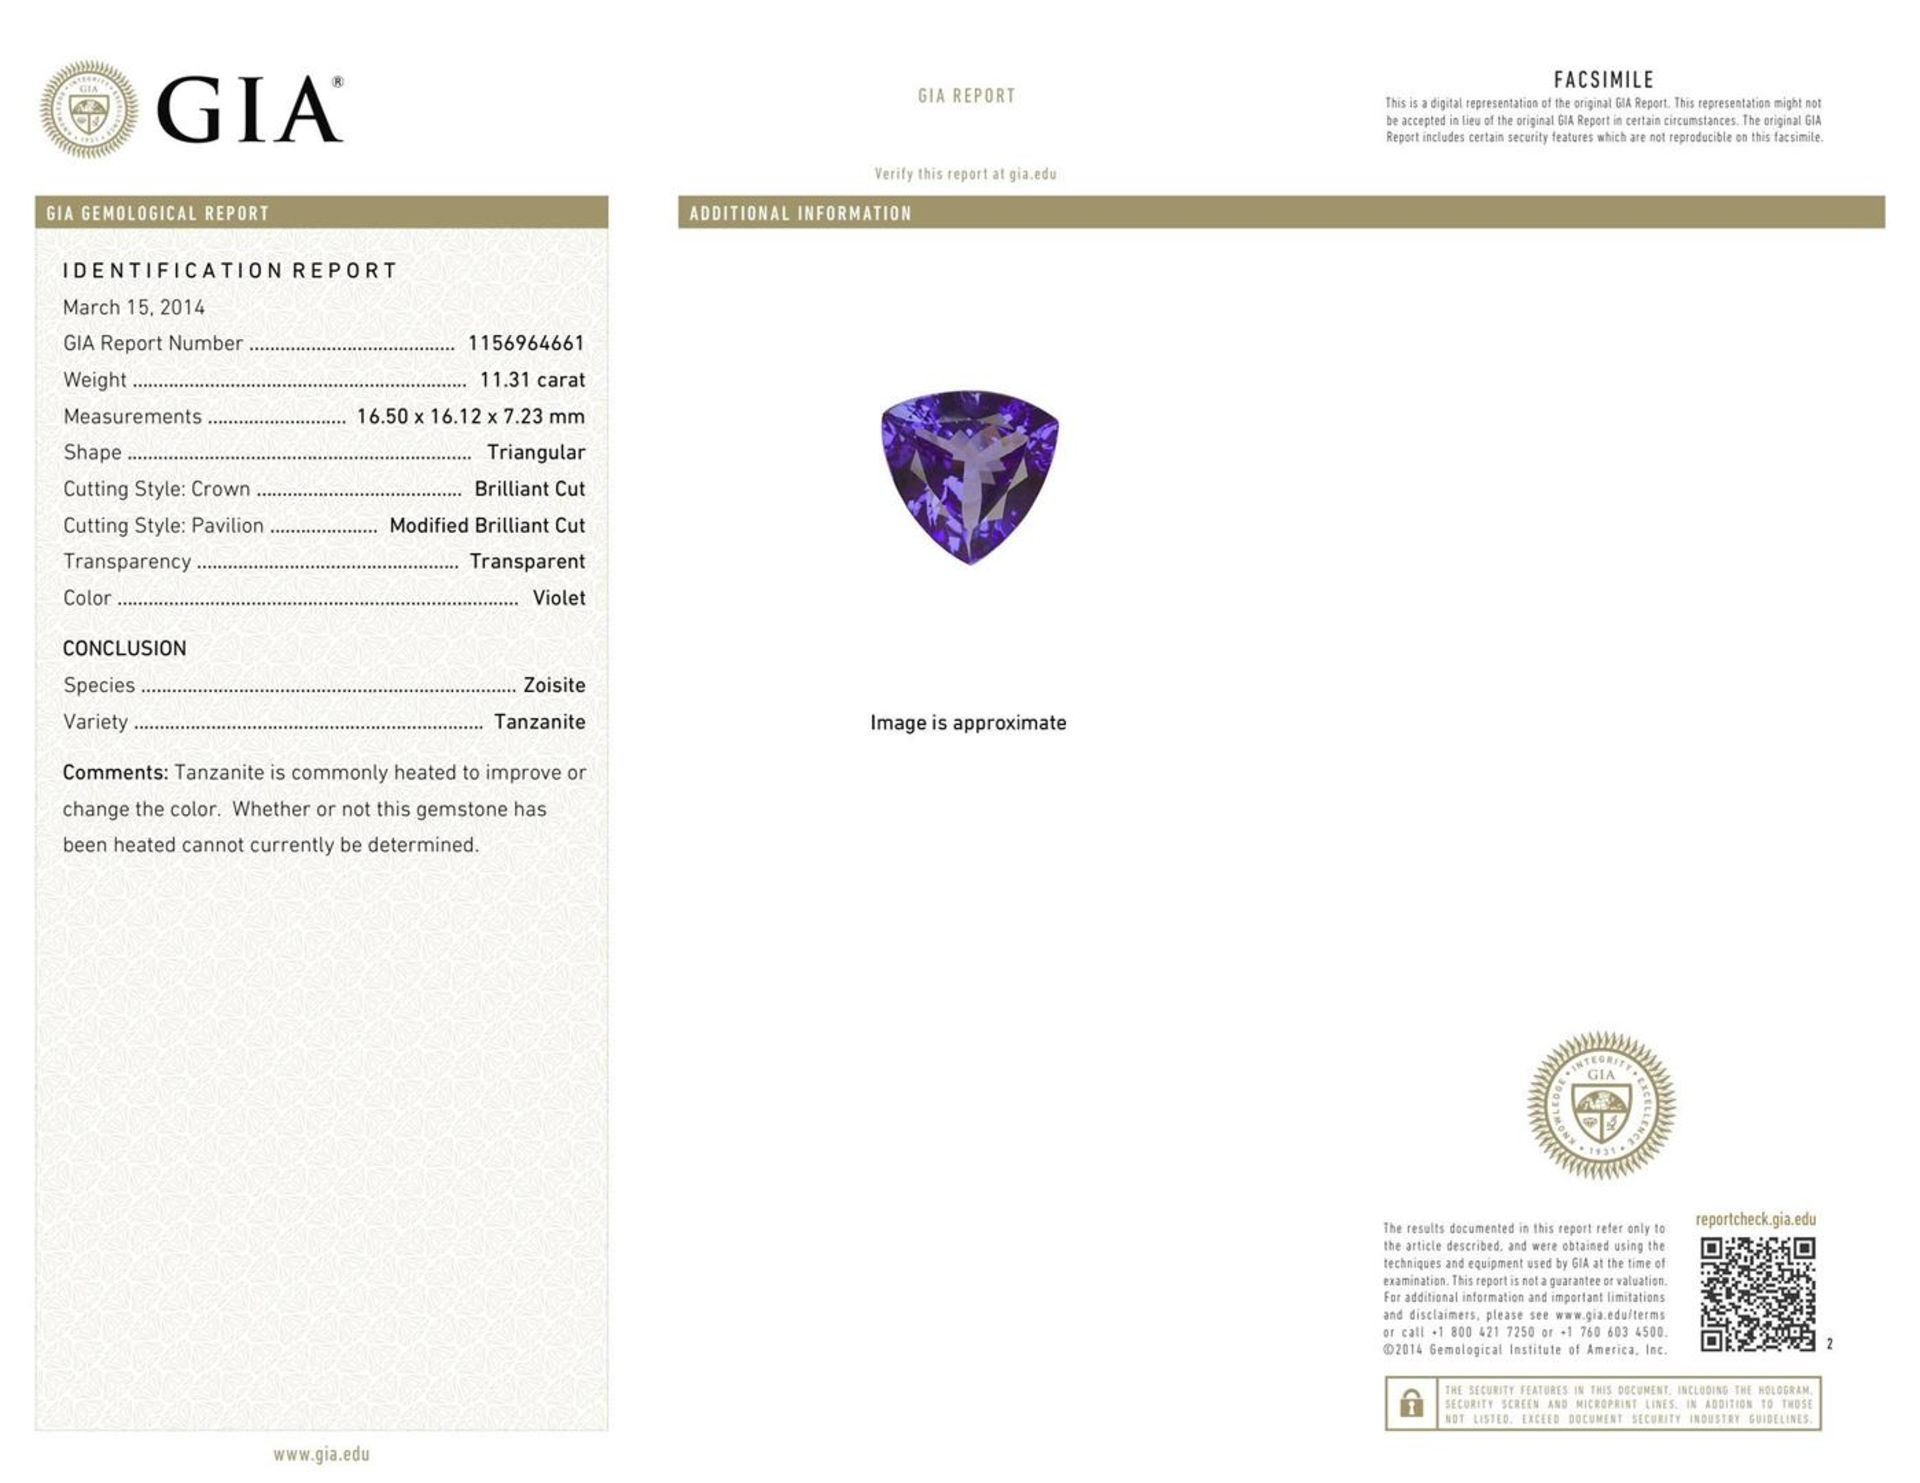 14KT White Gold 11.31 ctw GIA Certified Tanzanite and Diamond Pendant With Chain - Image 4 of 4